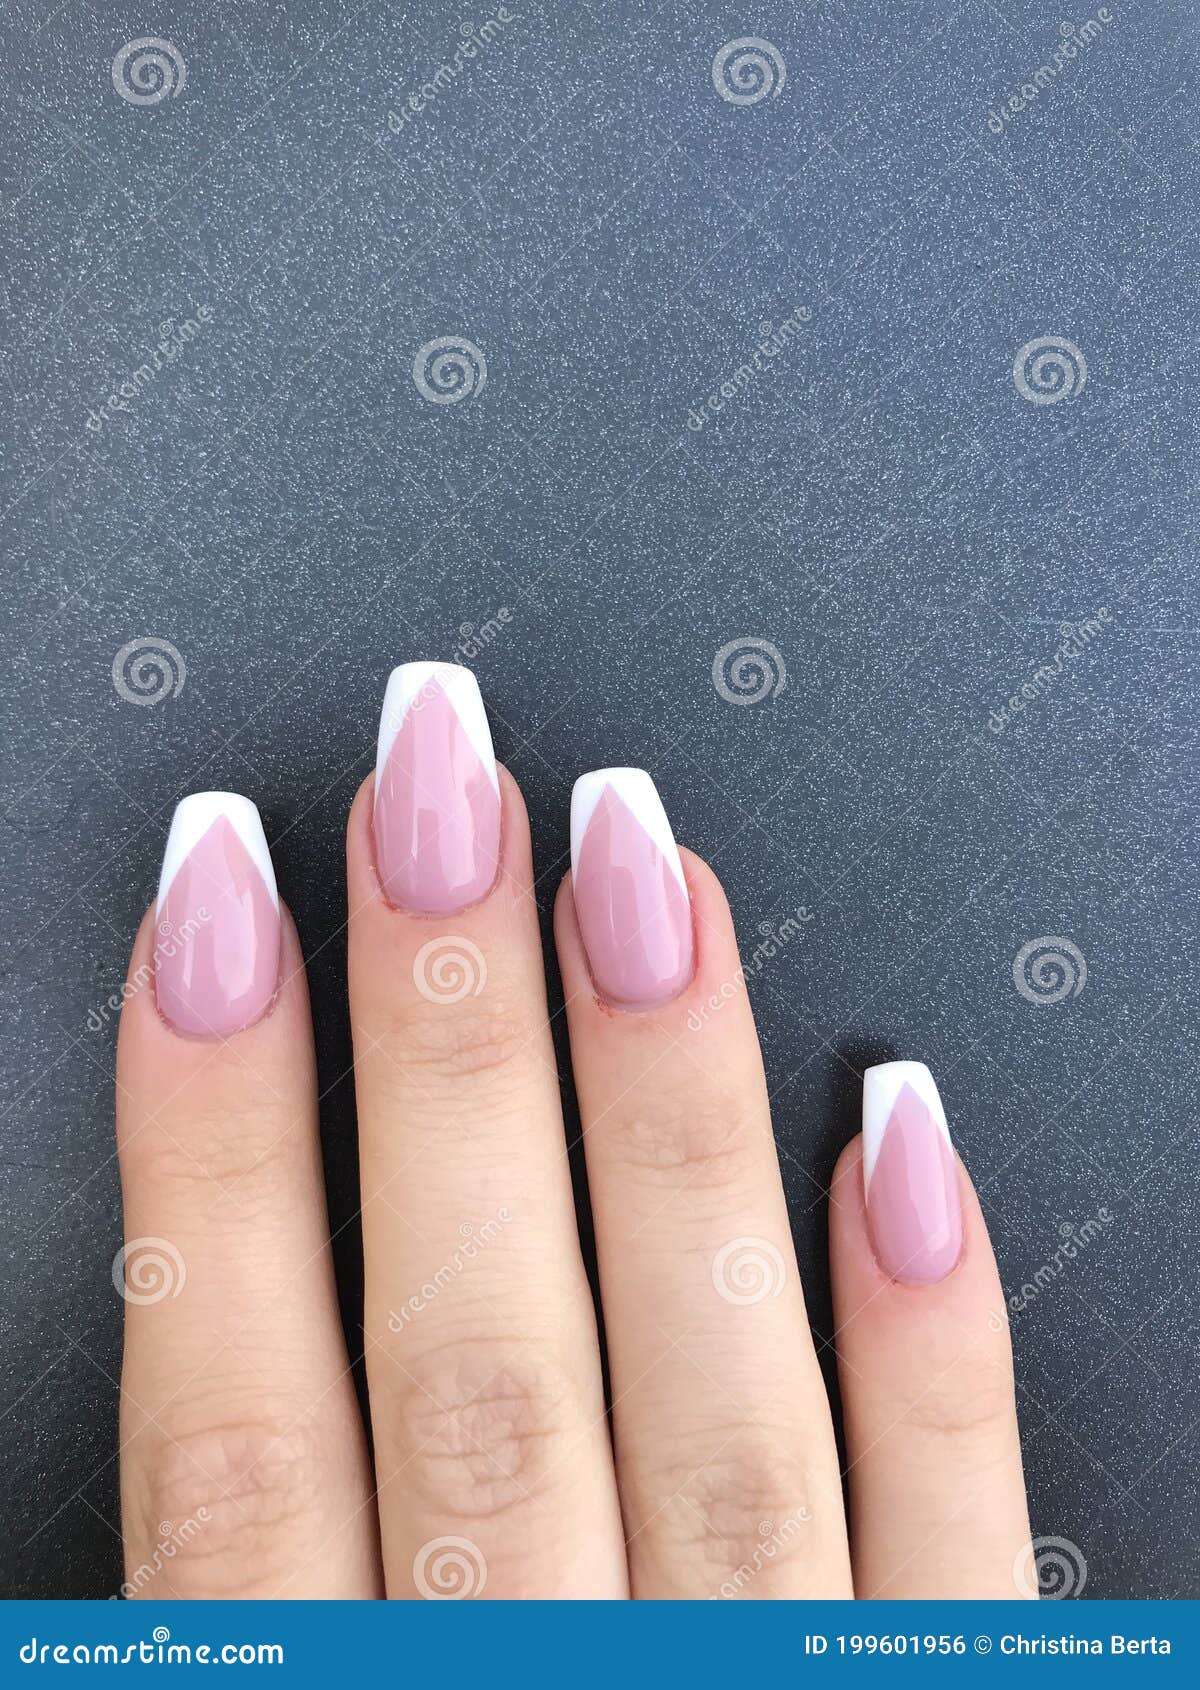 French Manicure with Sharp Angled Tips Stock Photo - Image of hand, shape:  199601956